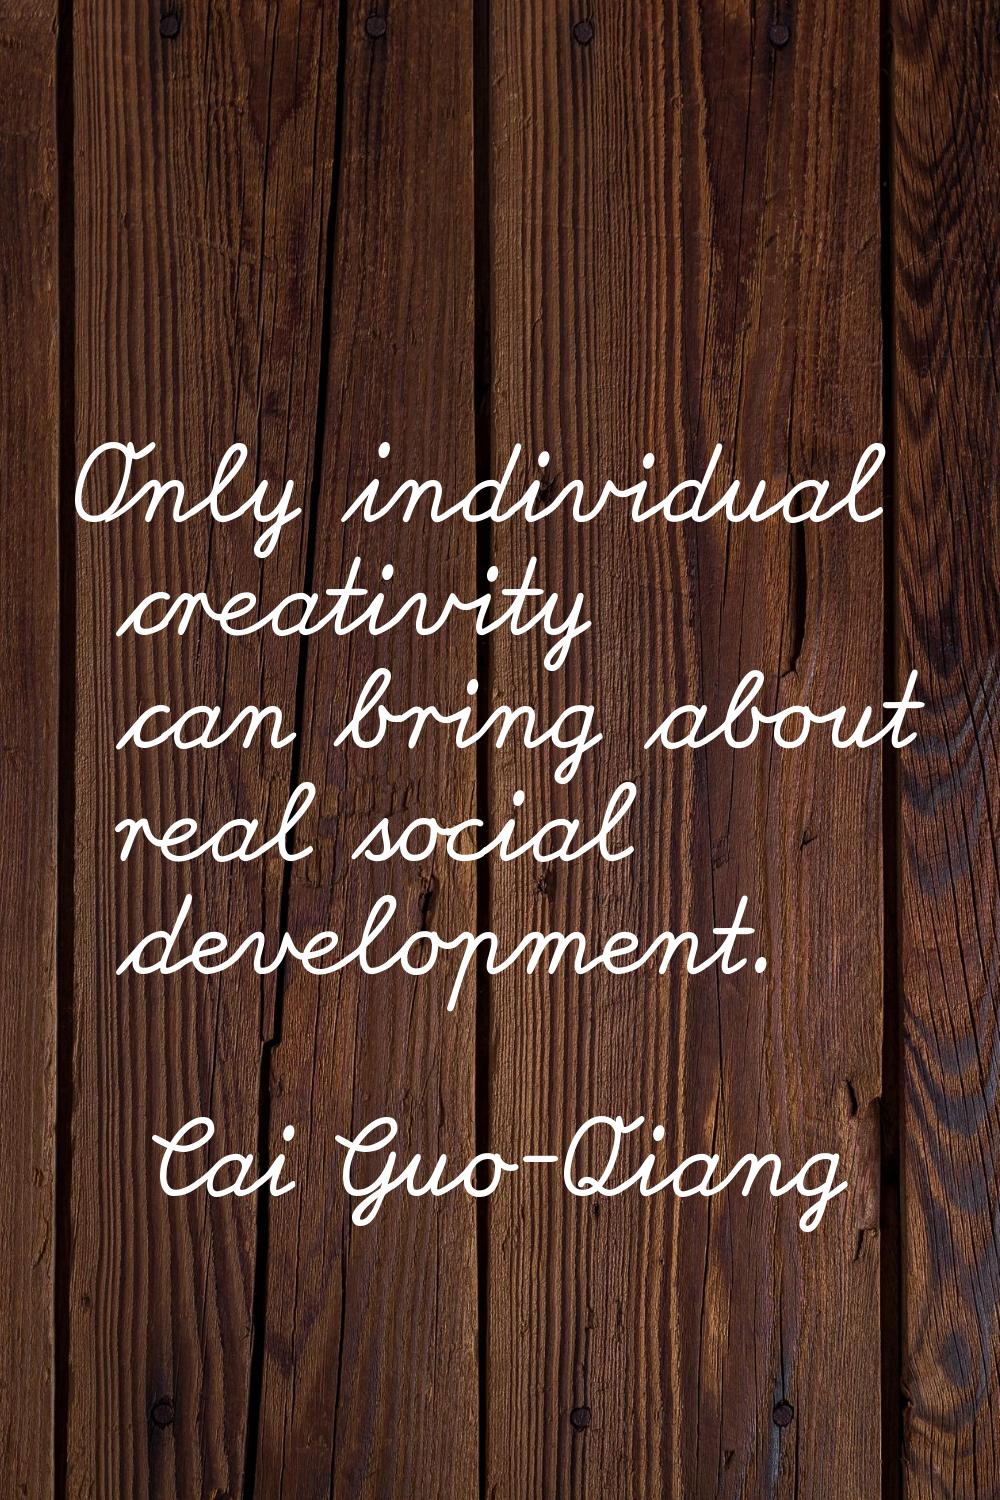 Only individual creativity can bring about real social development.